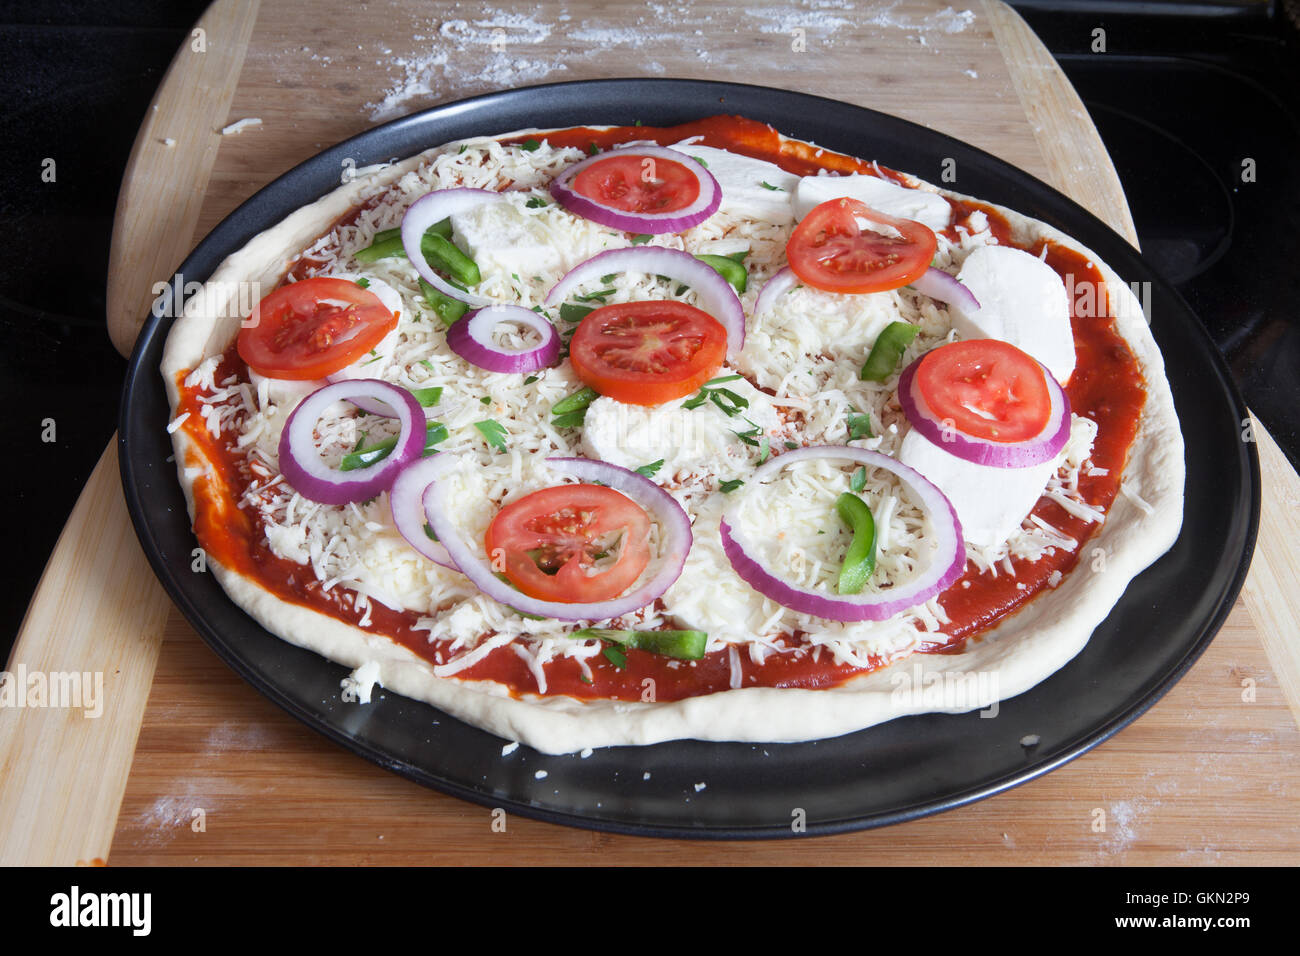 NYC, New York Style Pizza, tomatoes, fresh mozzarella, red onions,green bell, peppers stone, vegetarian pizza, Italian Pizza, Stock Photo